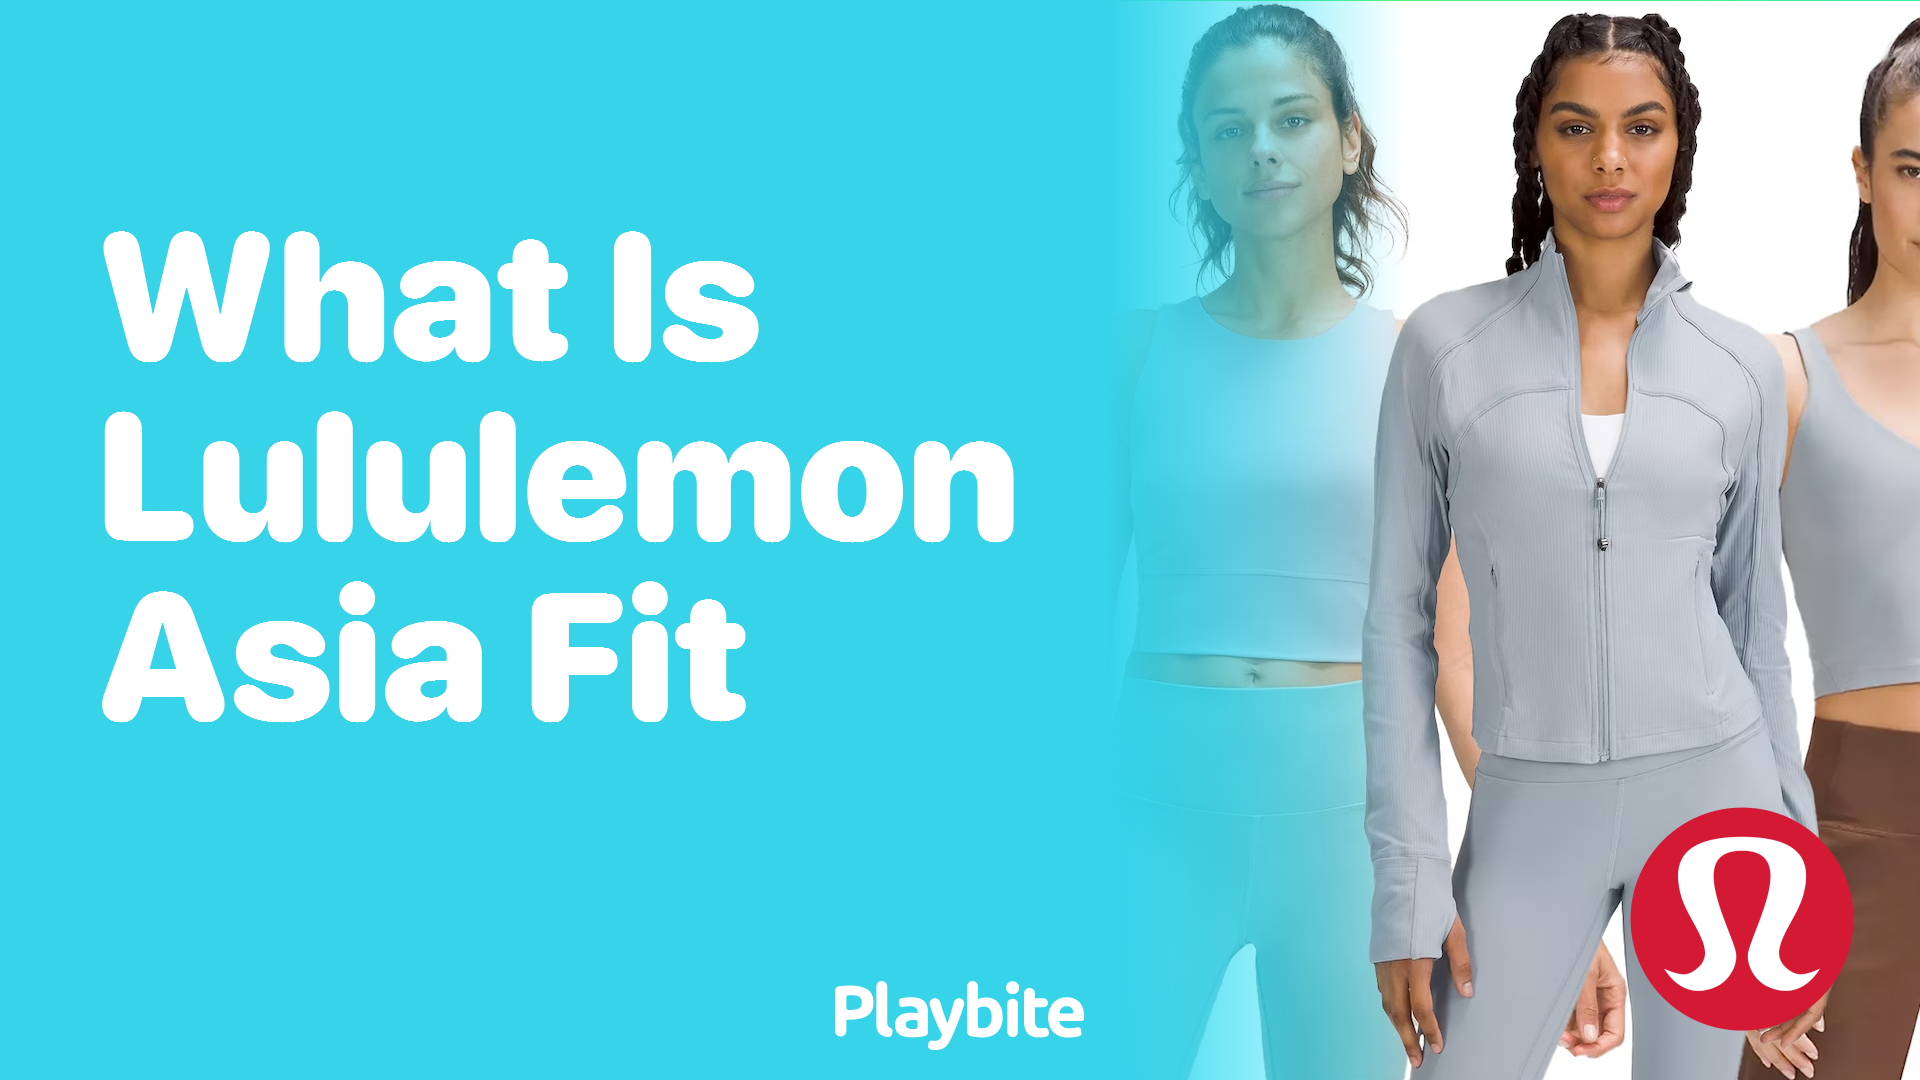 What Is Lululemon Asia Fit? - Playbite